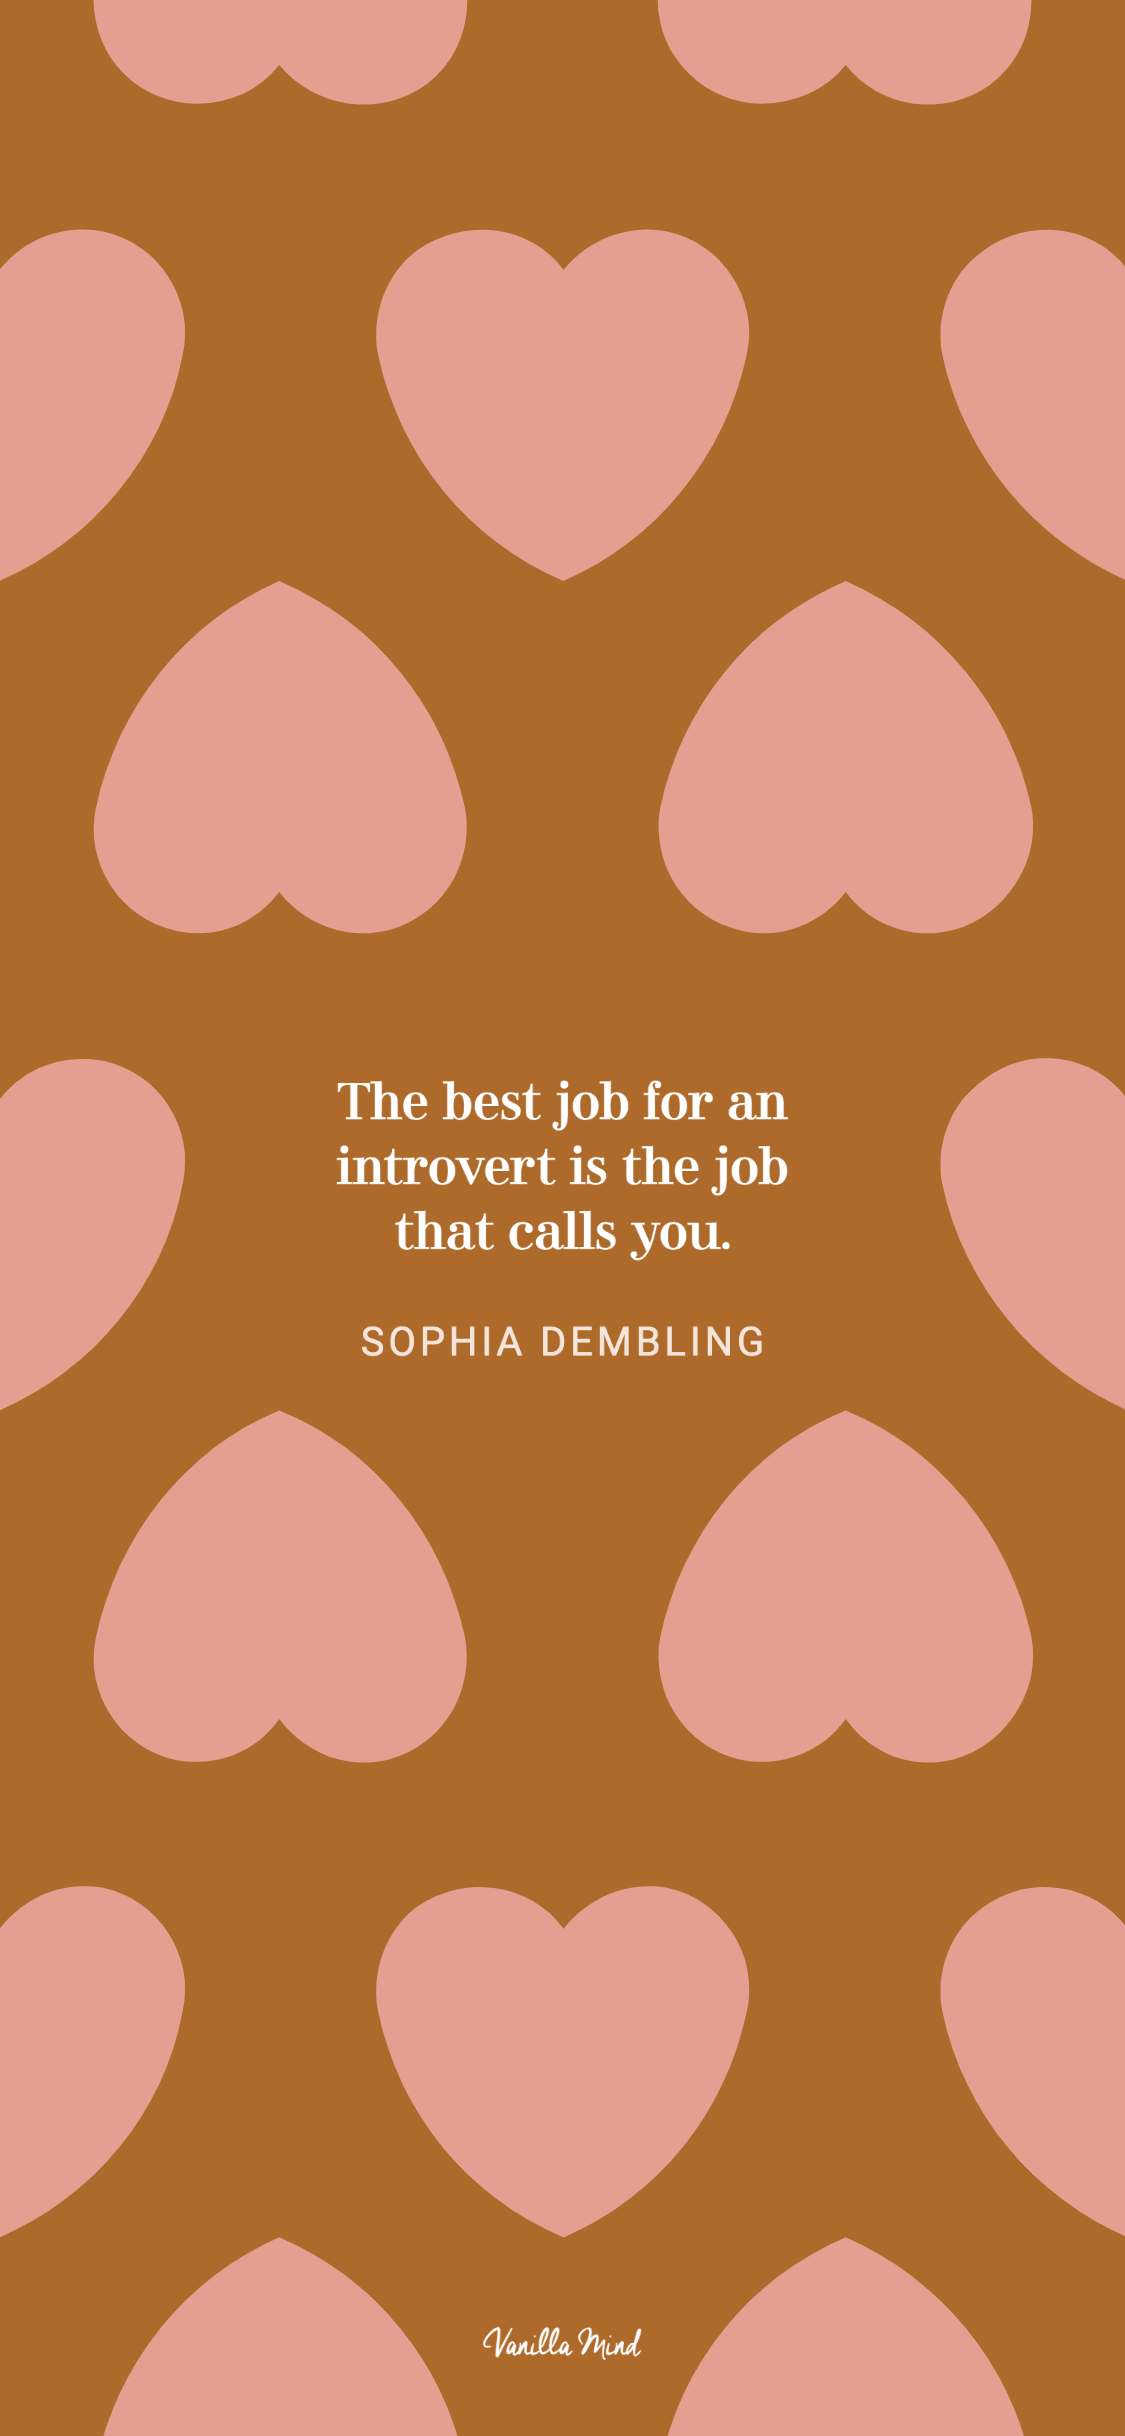 “The best job for an introvert is the job that calls you.”  – Sophia Dembling